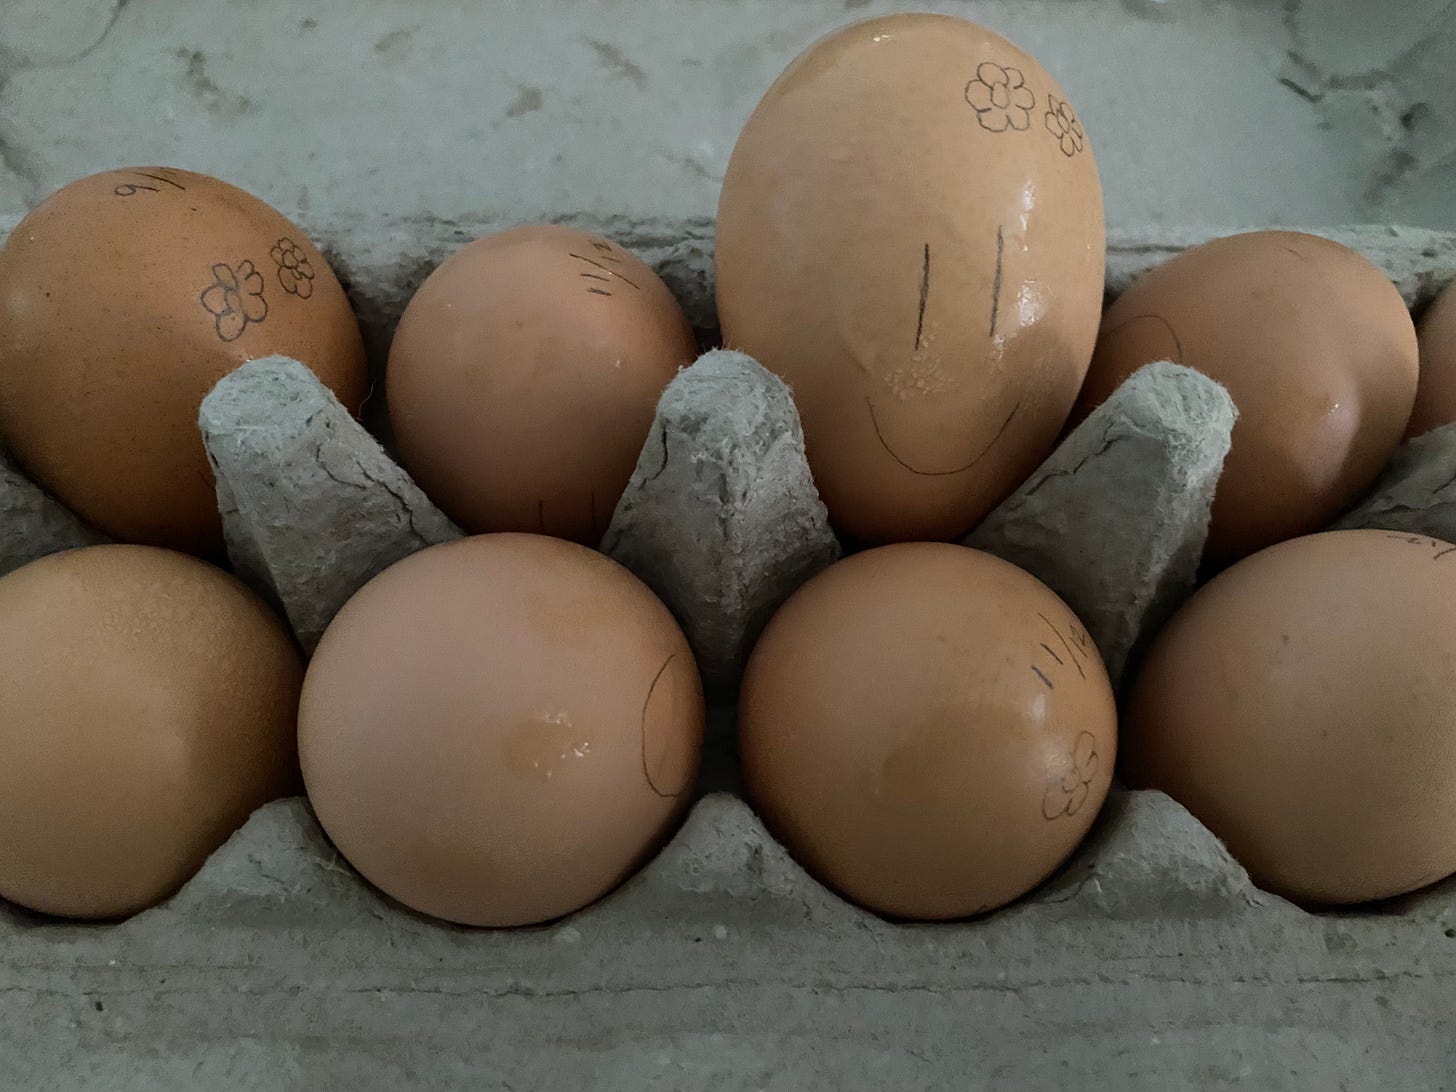 Six regular size eggs, one small egg and one enormous egg in a carton